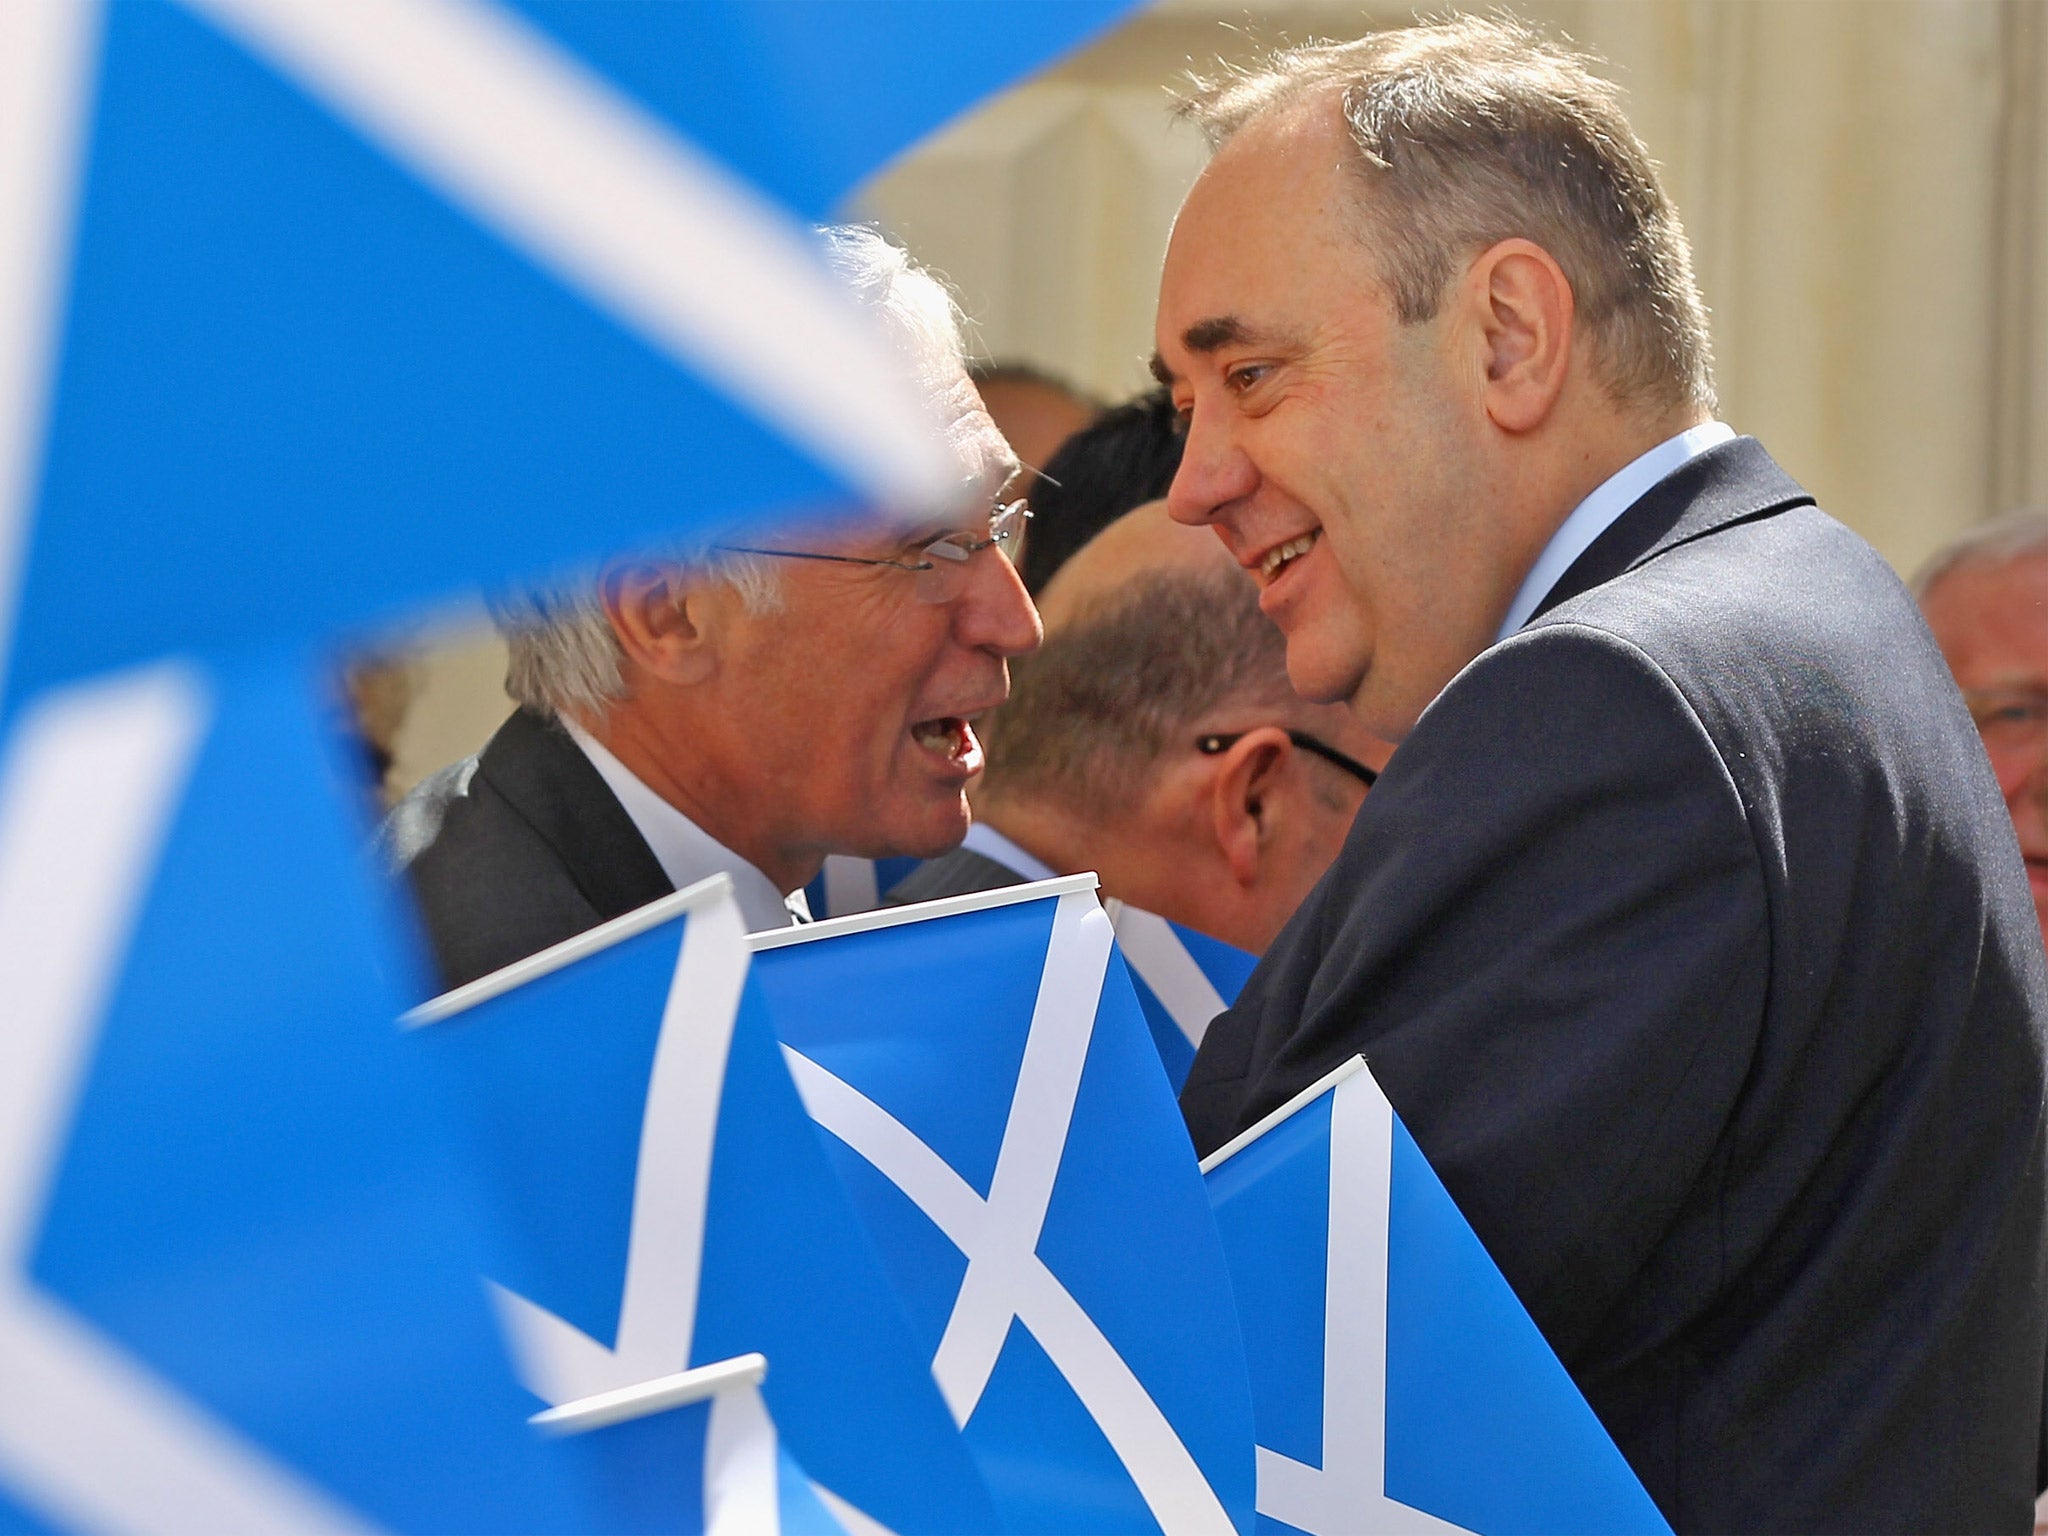 Support for Scottish independence appears to be slipping away as voters turn their backs on Alex Salmond’s bid, the results of a new opinion poll have suggested.